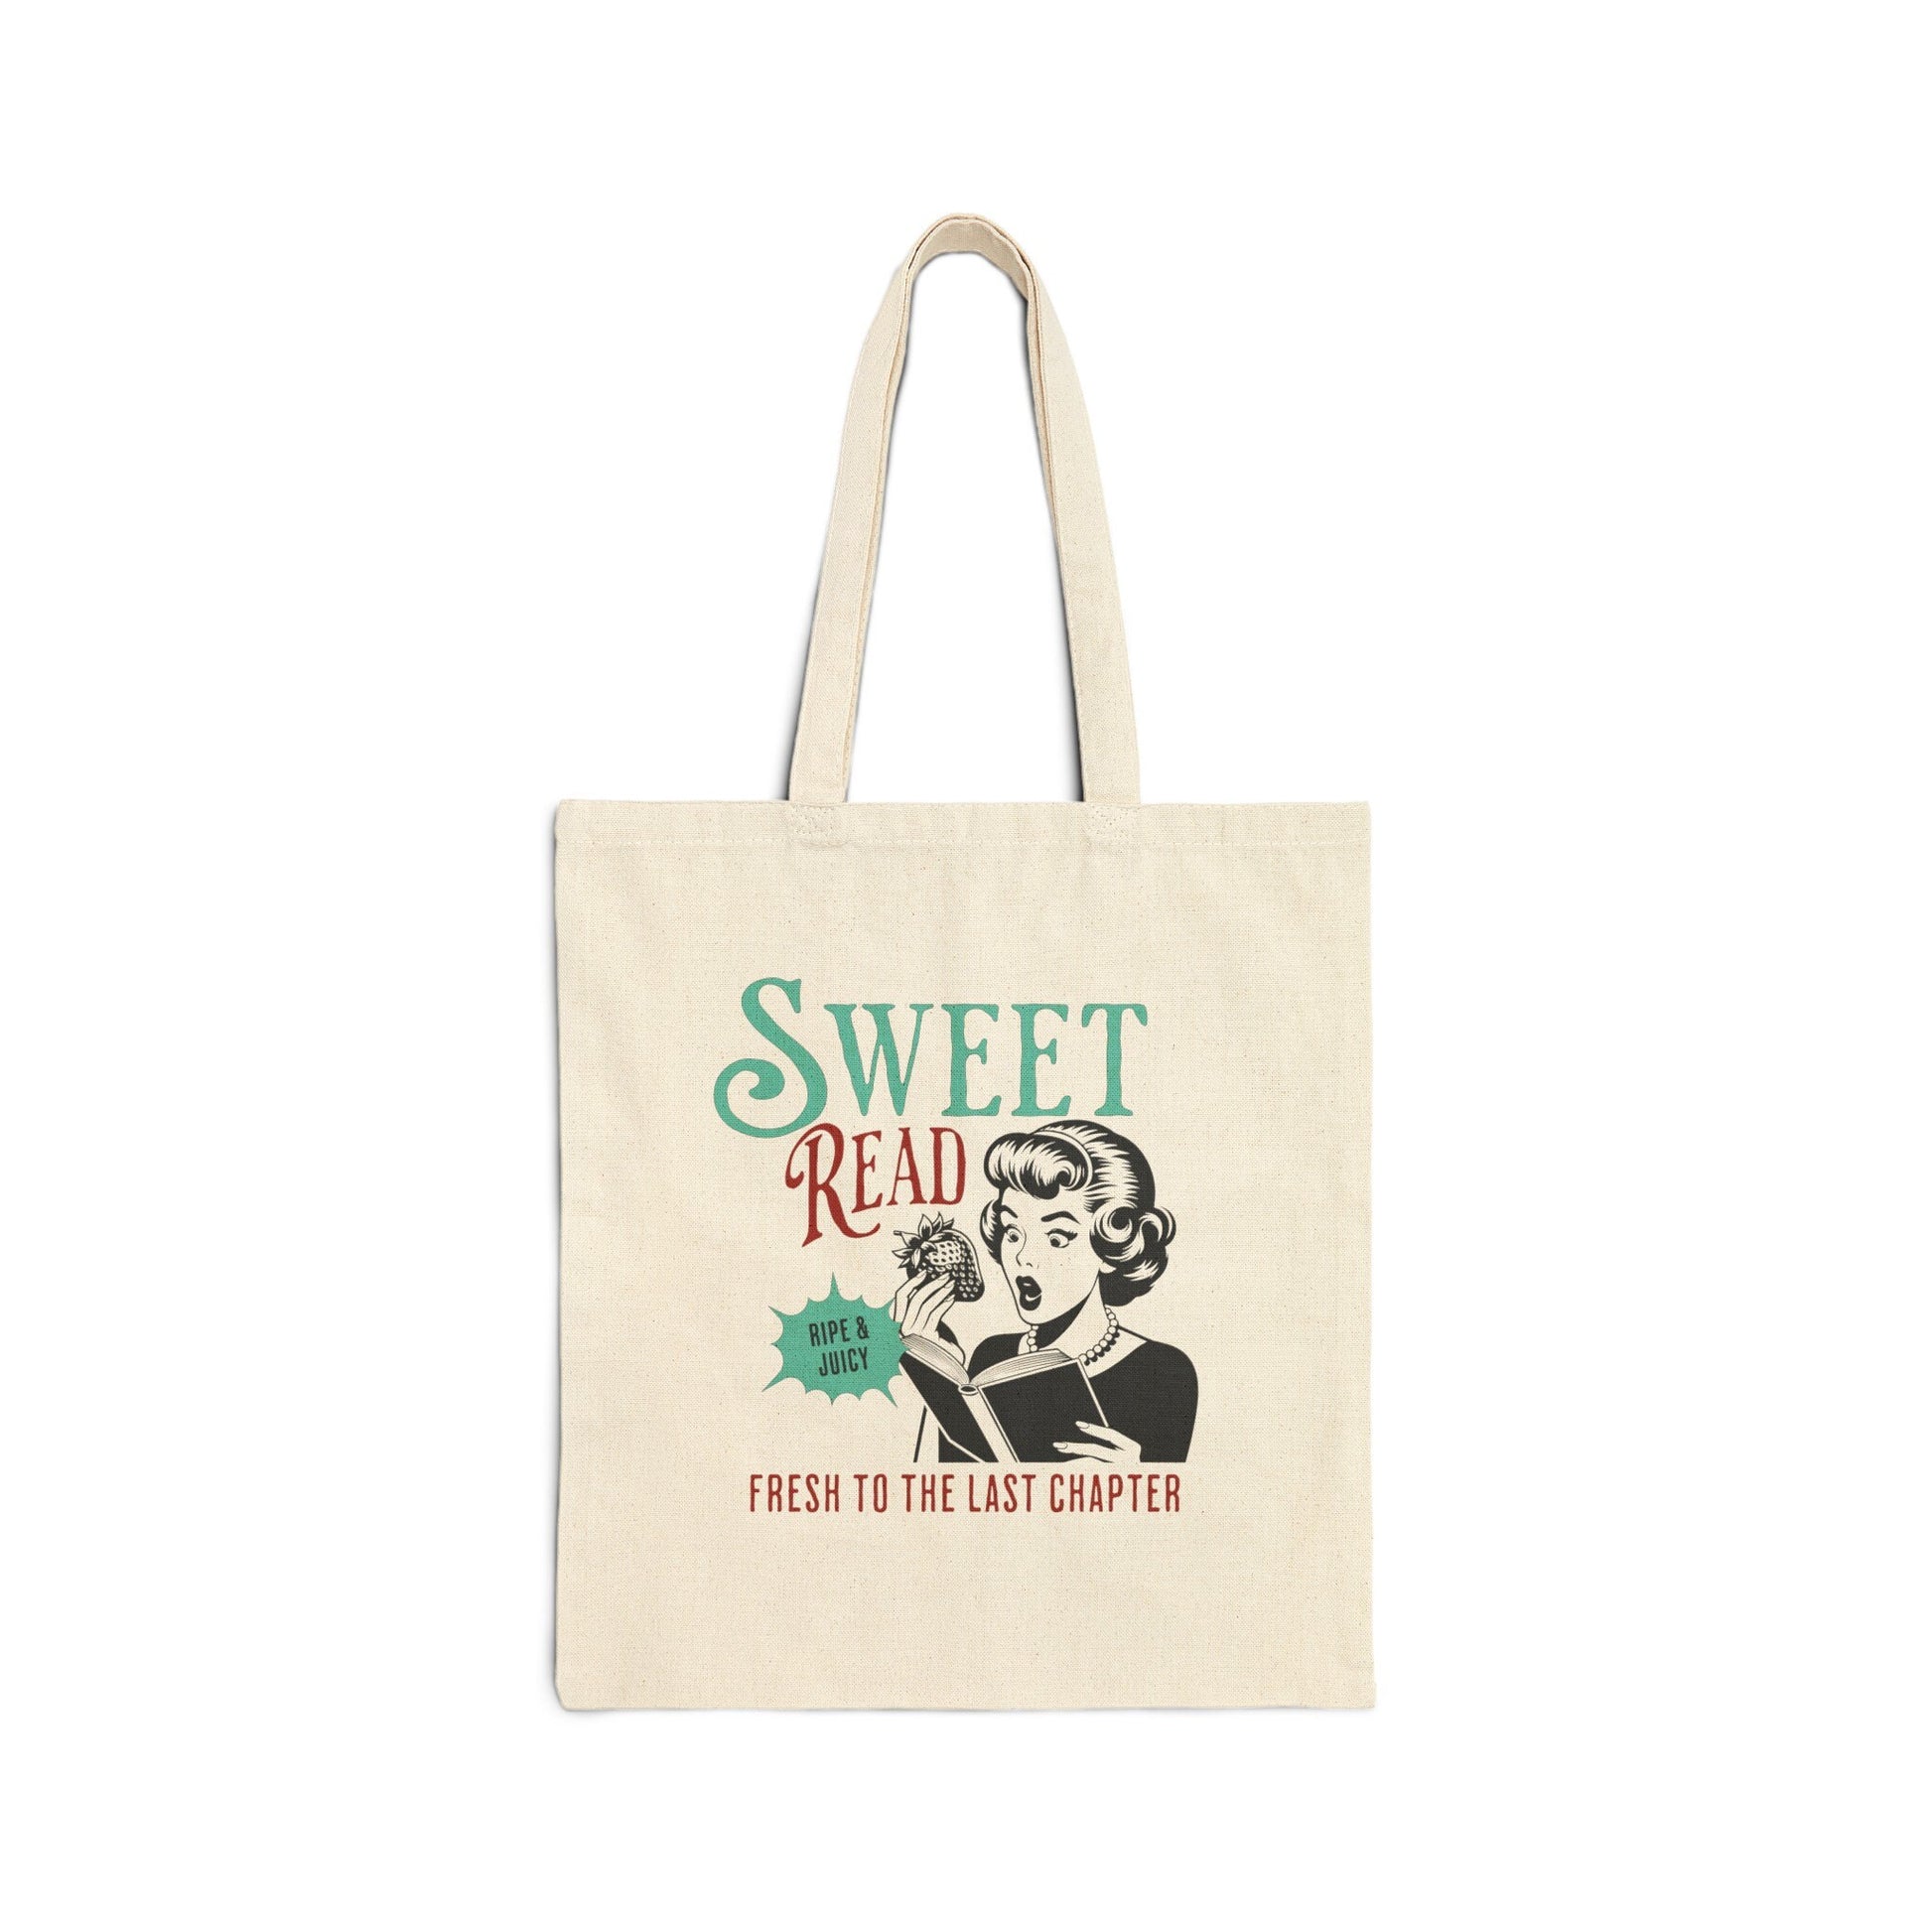 Sweet Read Strawberry Tote Bag, Bookish Things Totebag Smut Gifts Read Banned Books Booktrovert Book Club Bag Library Bag Book Themed Gifts